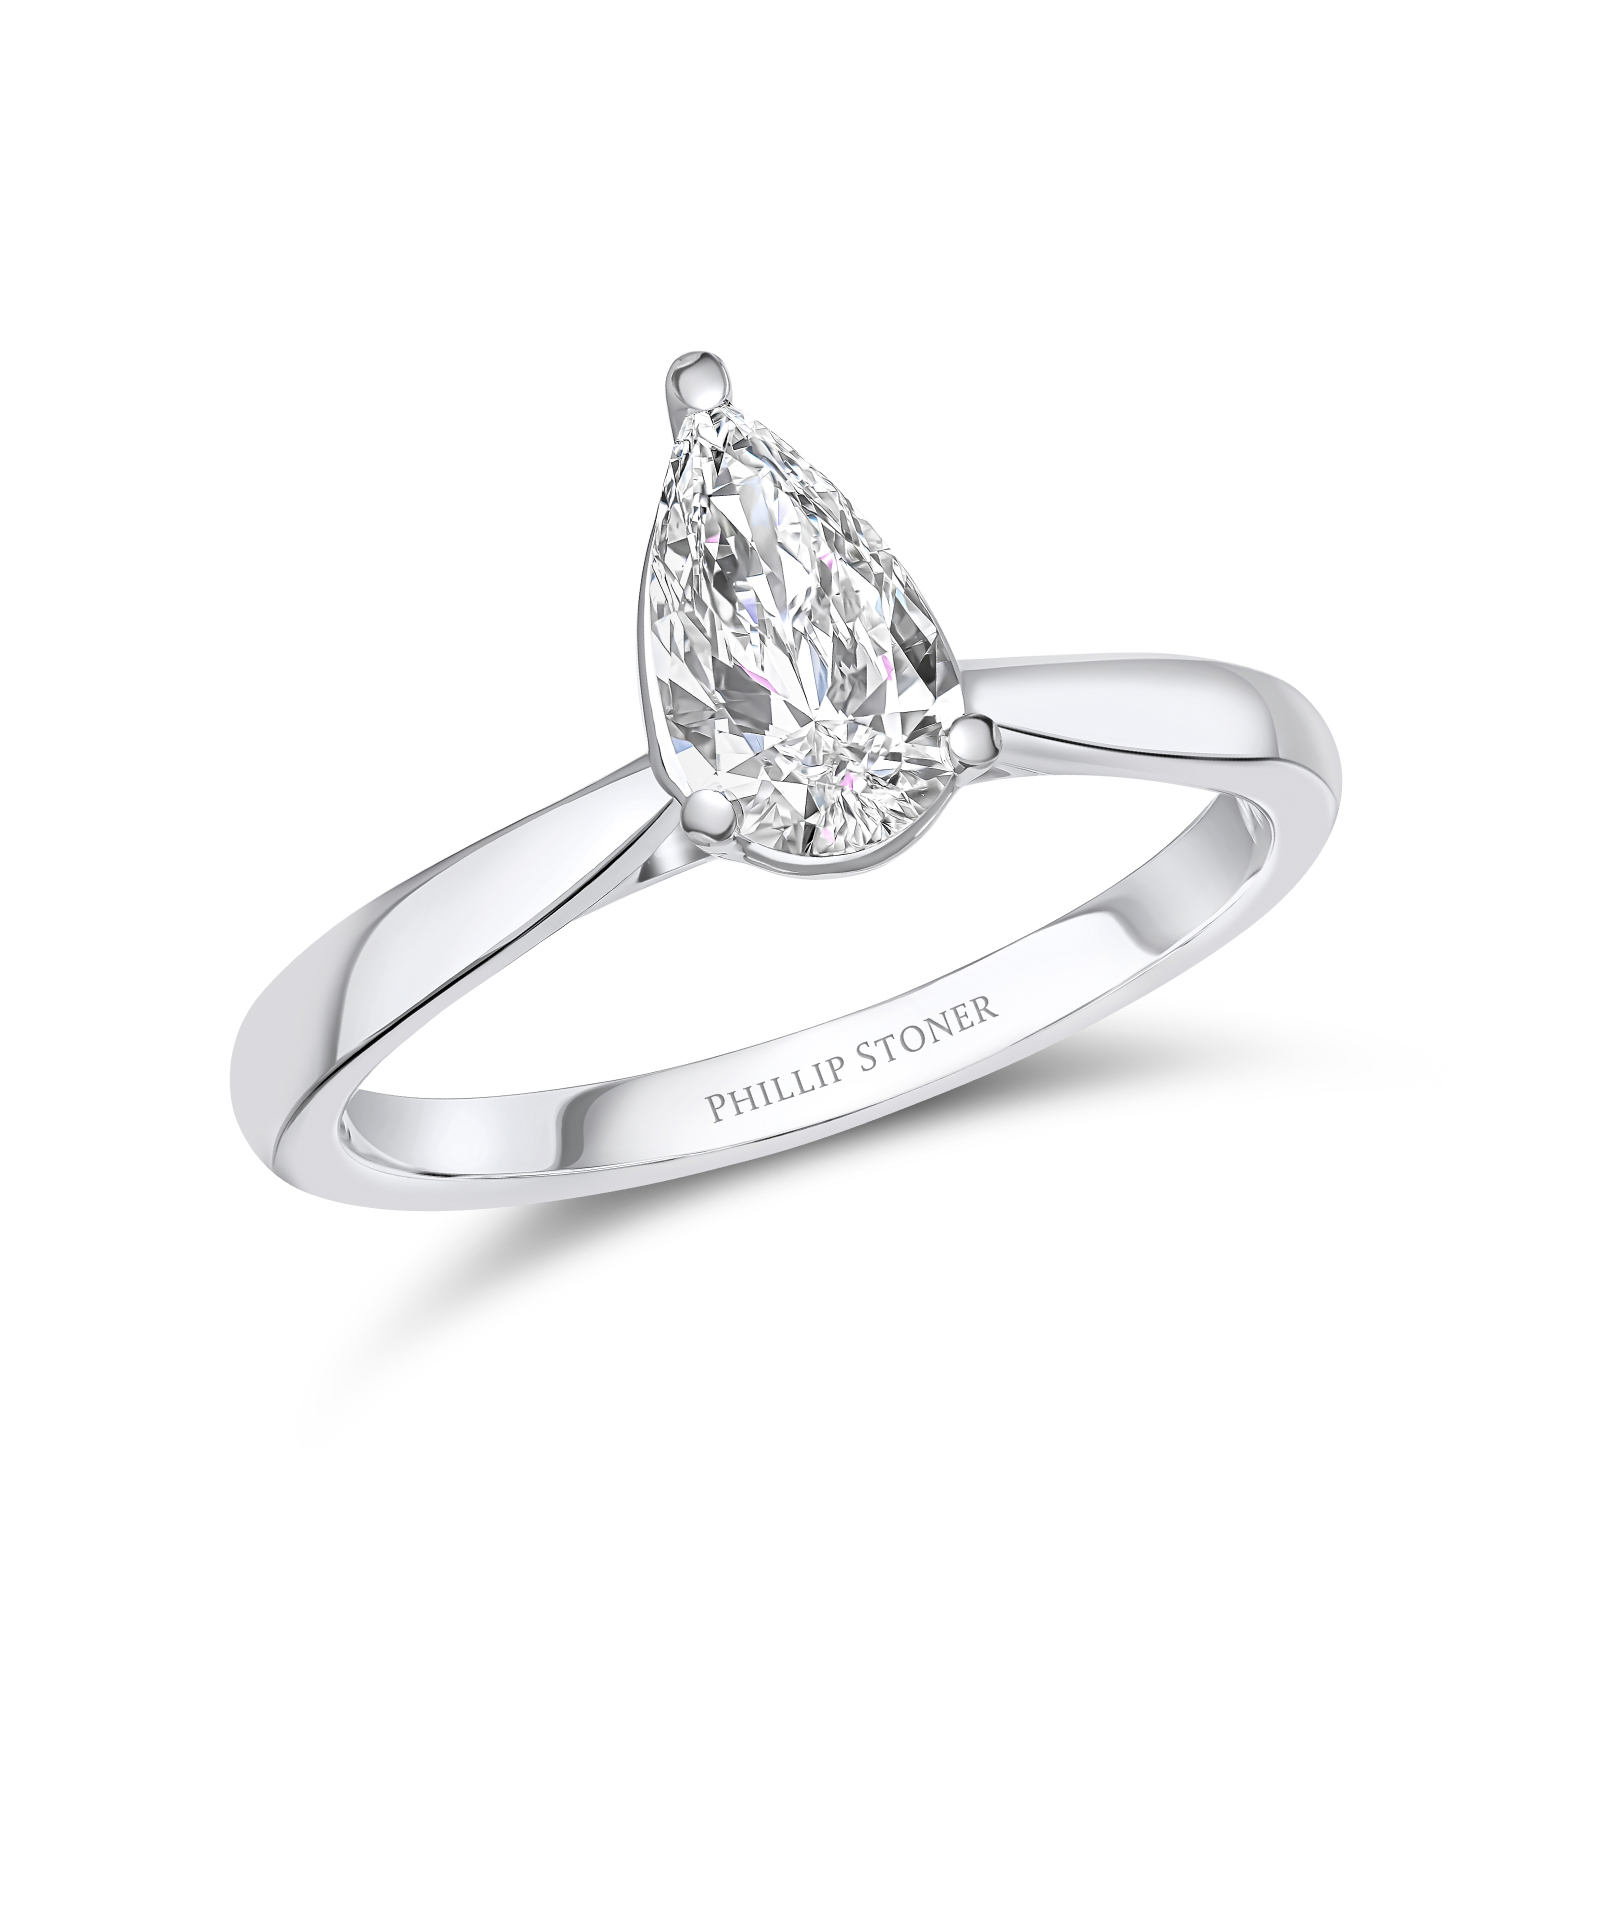 0.70ct Pear Cut Diamond Solitaire Engagment Ring - Phillip Stoner The Jeweller